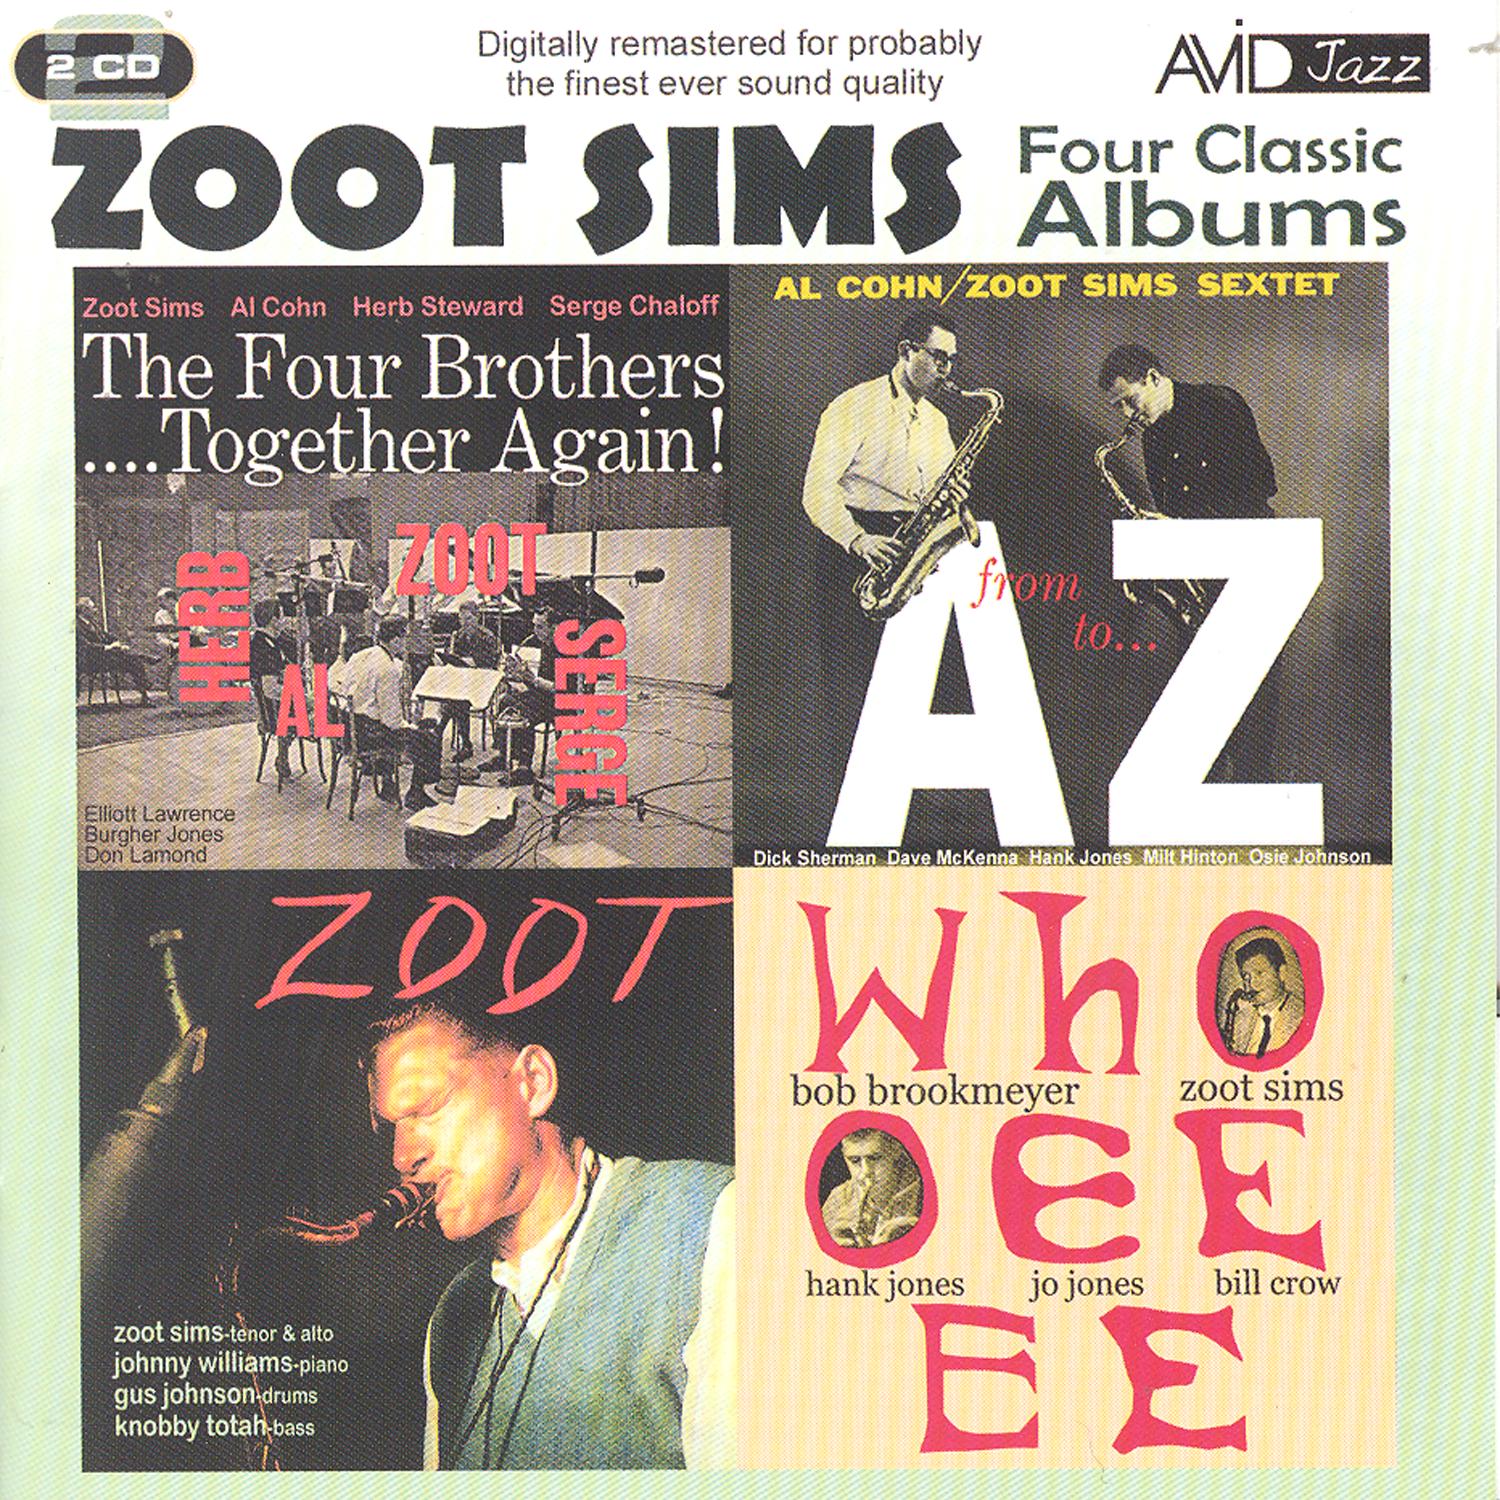 Four Classic Albums (The Four Brothers - Together Again! / From A to Z / Zoot / Whooeeee) (Digitally Remastered)